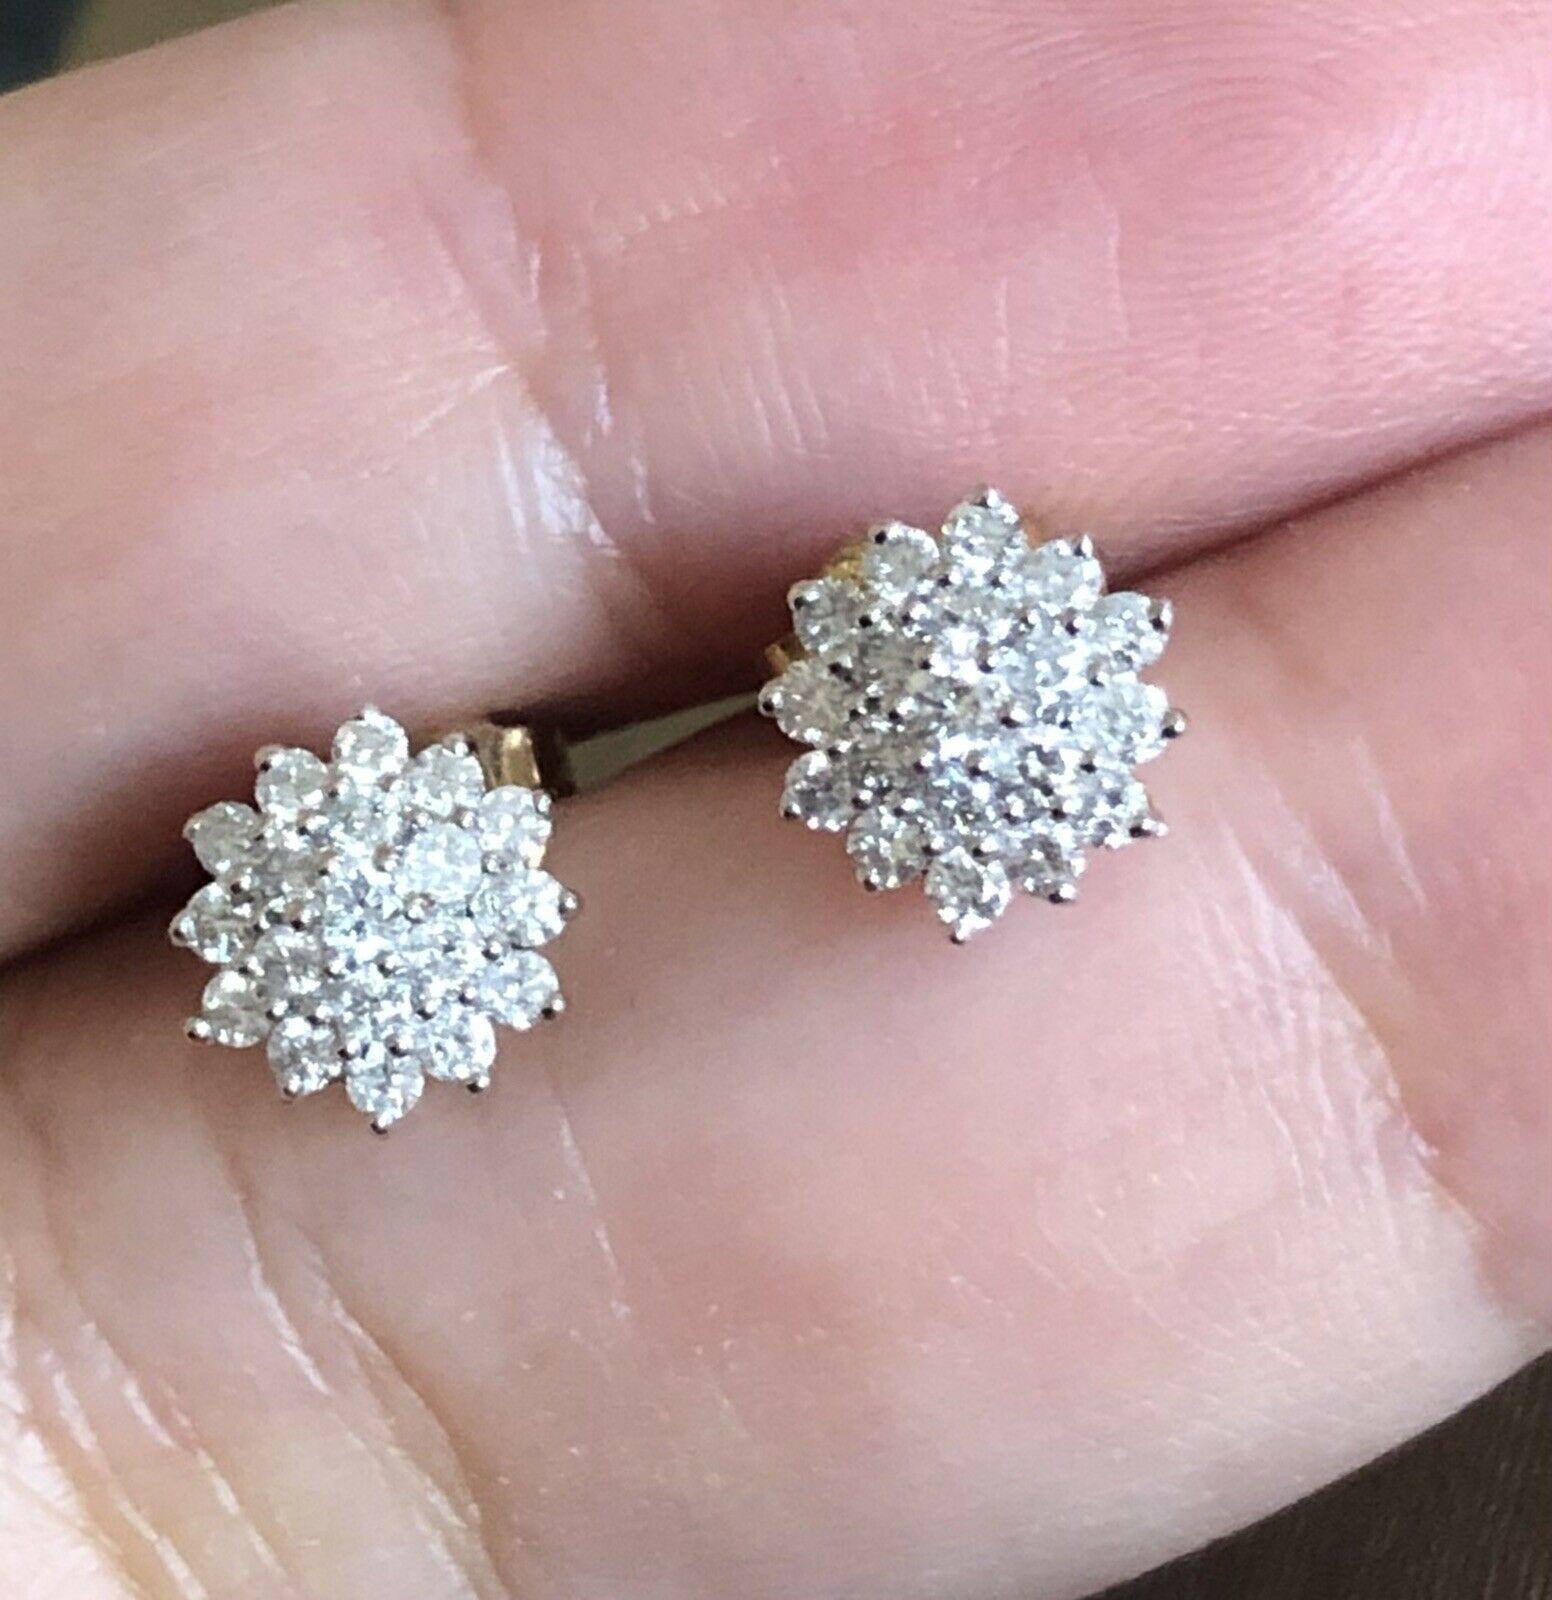 Diamond cluster Studs set in 9ct gold straight from heart of London Hatton garden

Hallmarked 375 for gold

Stones are 0.50ct in total (please check our listings for 1ct version of this style)

G/H

SI

Please study pics for weight and measures

It